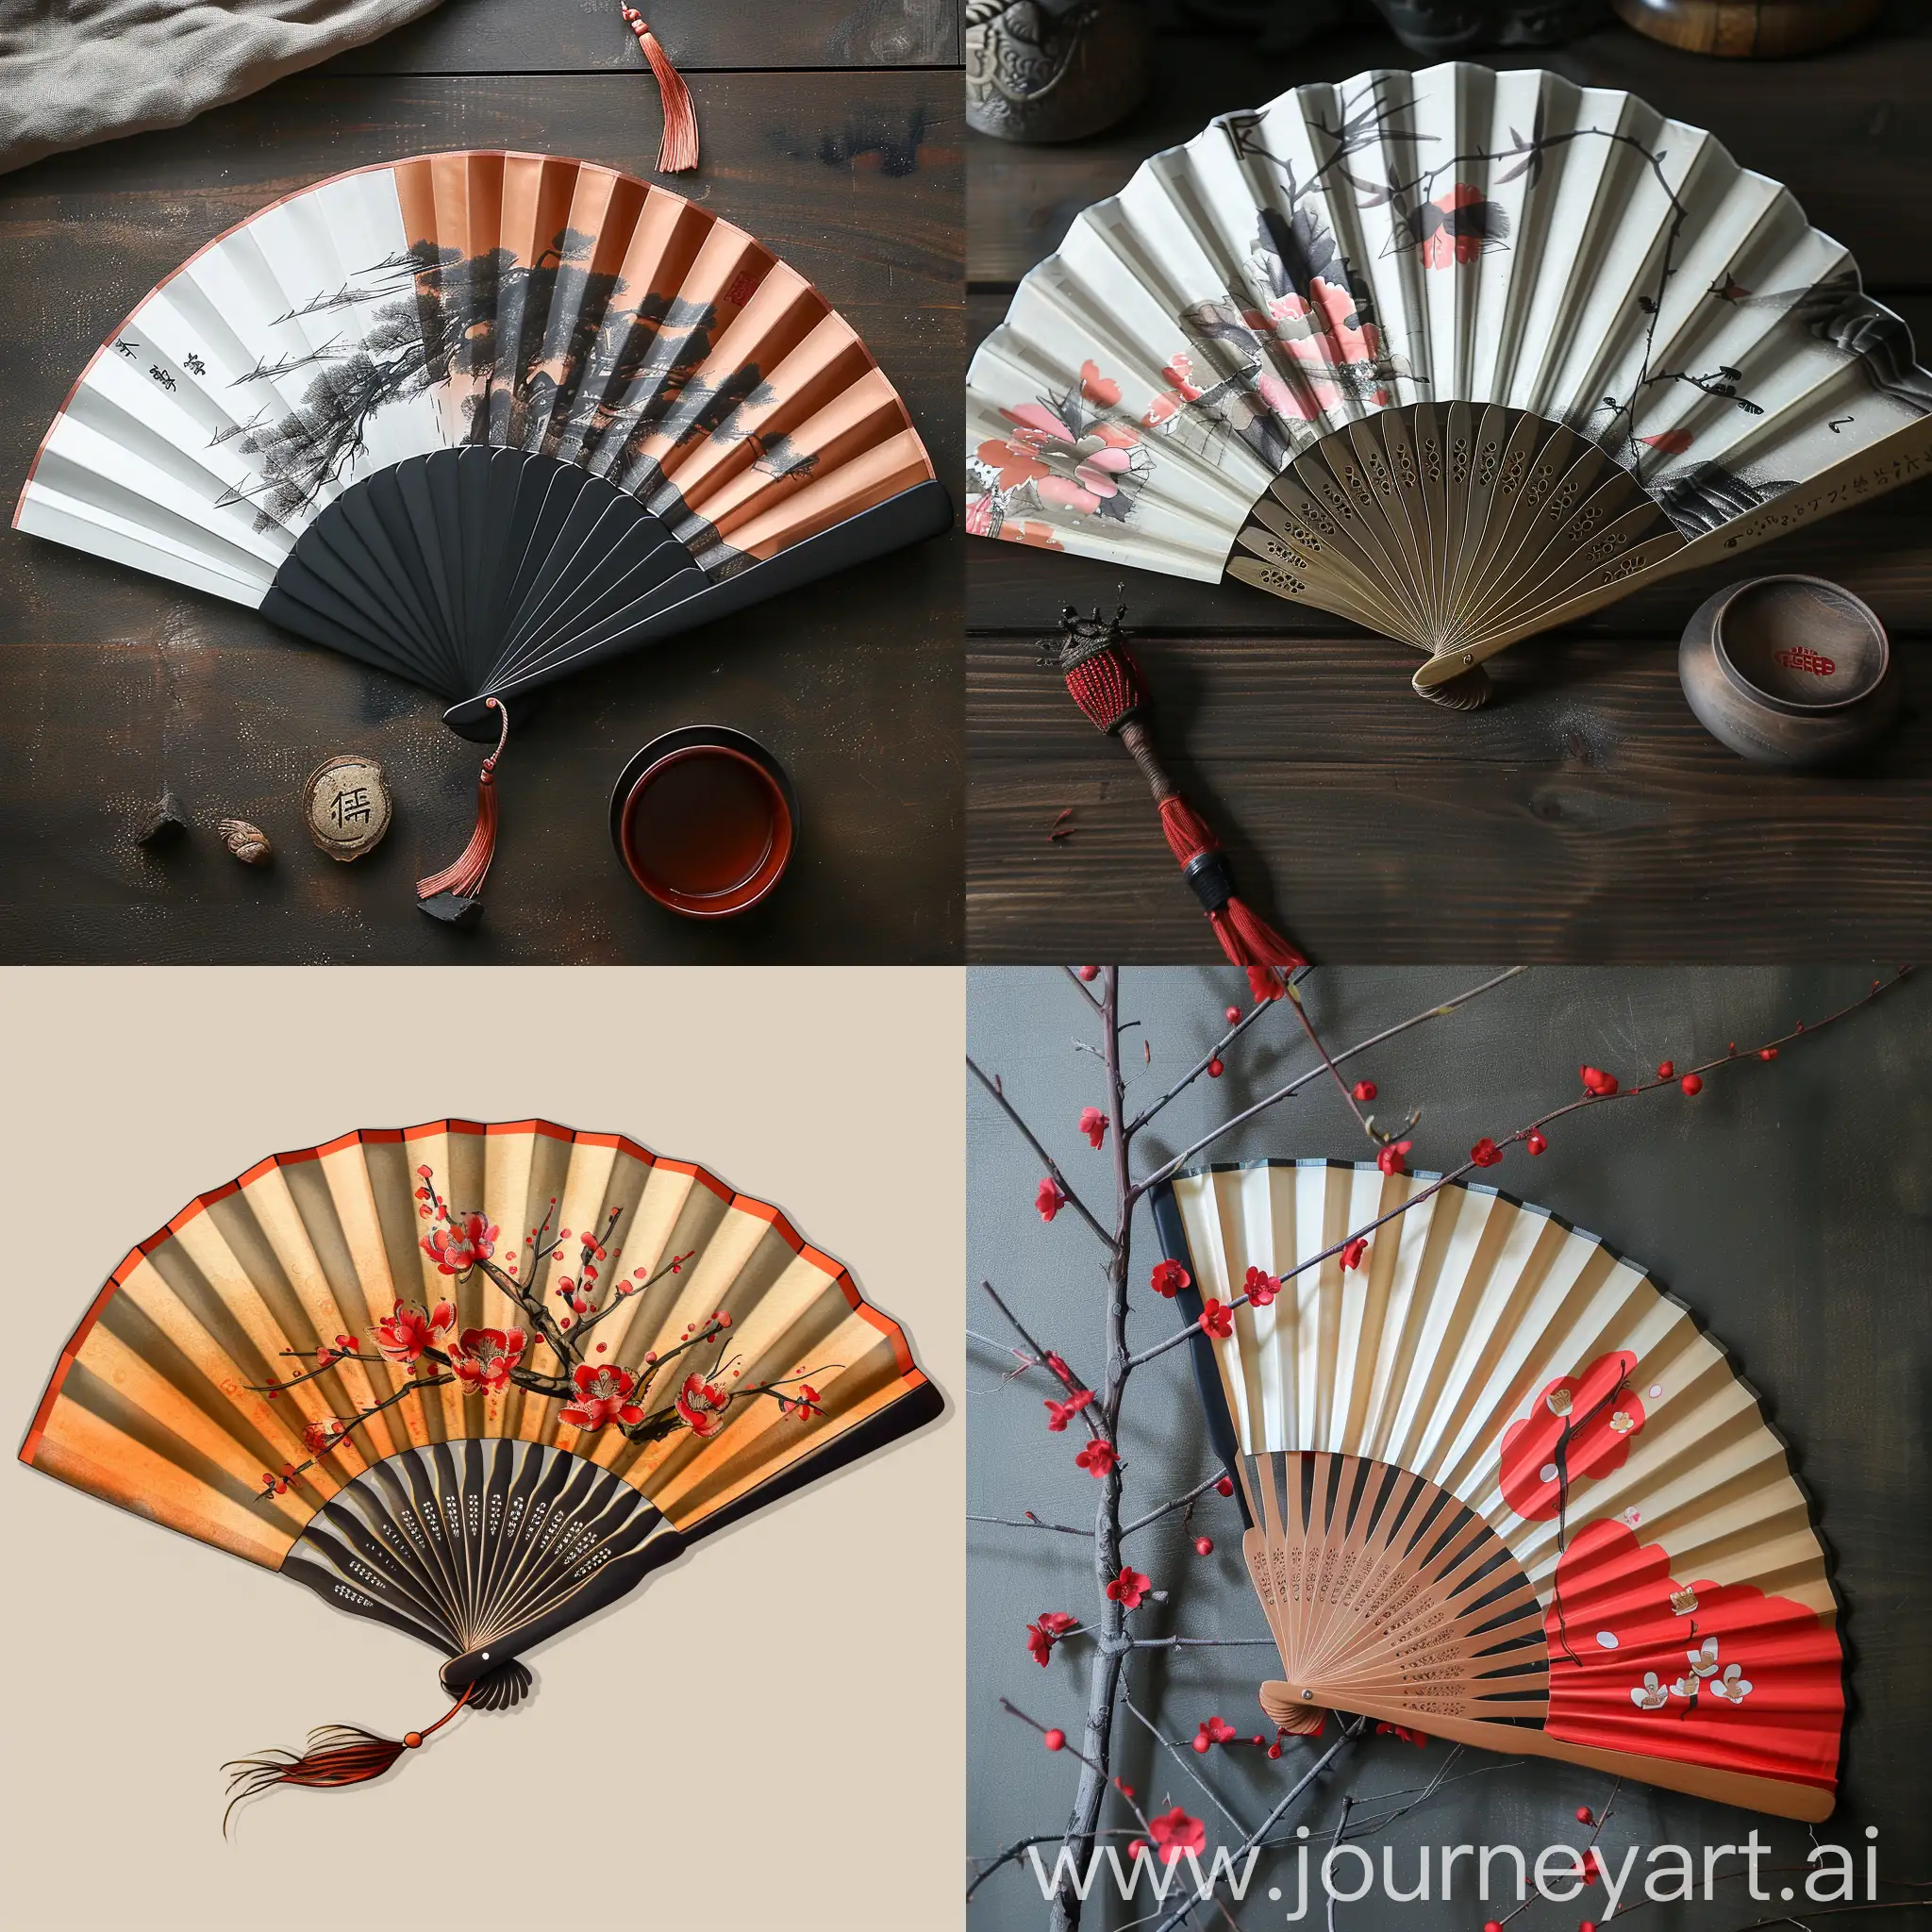 Chinesestyle-Fan-Craft-with-Intricate-Design